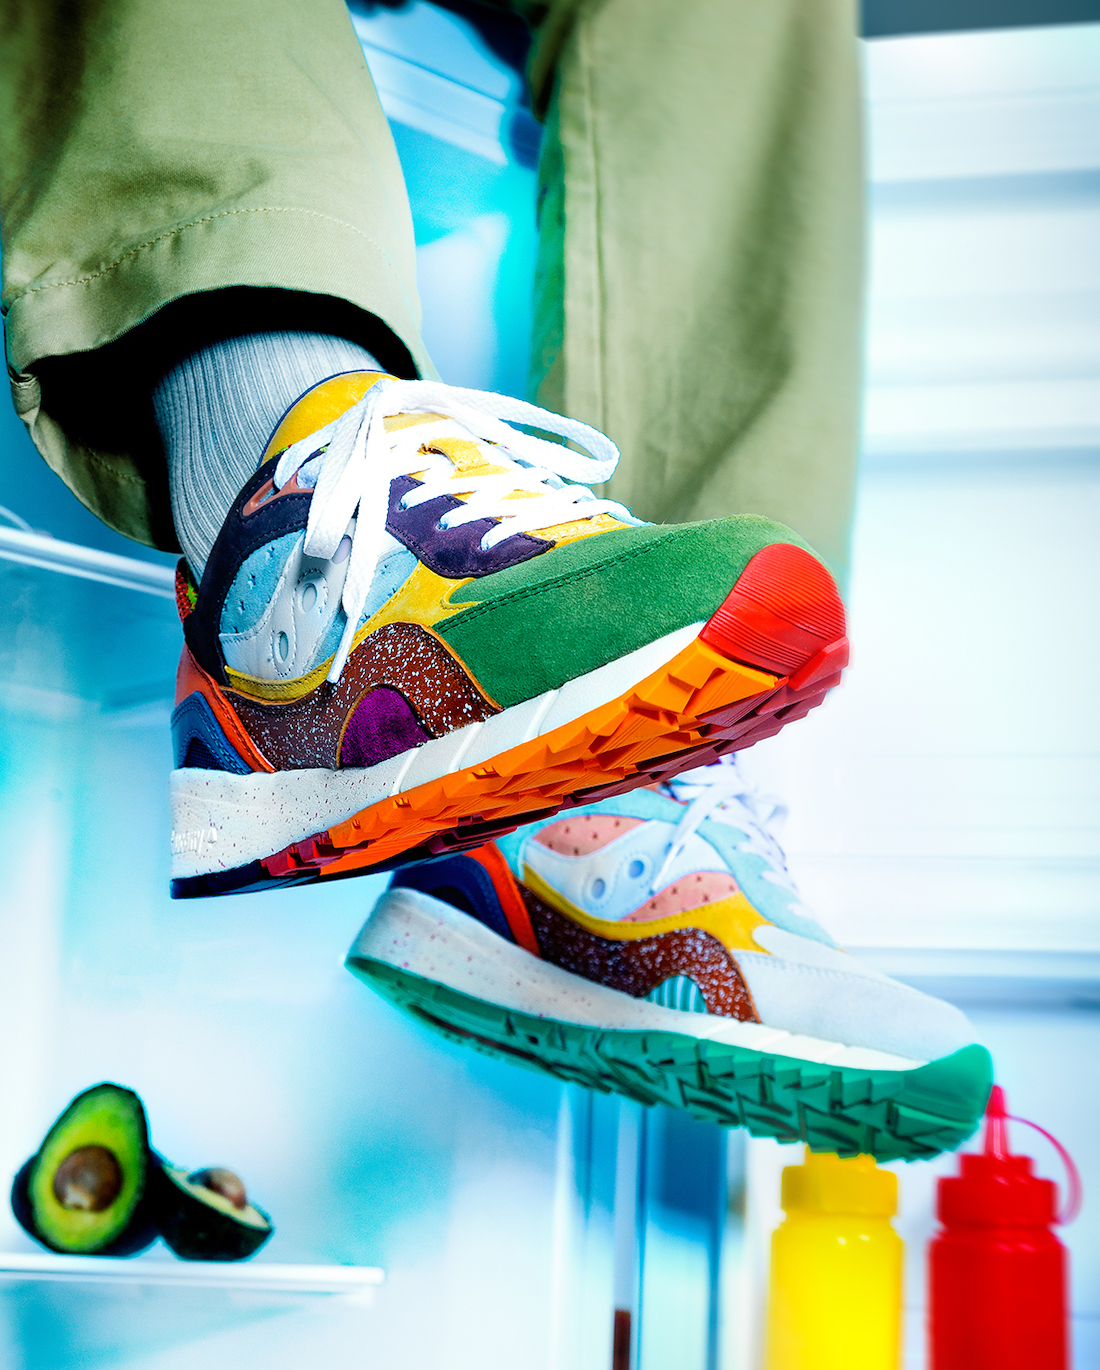 Saucony Shadow 6000 Food Fight S70595-1 Release Date